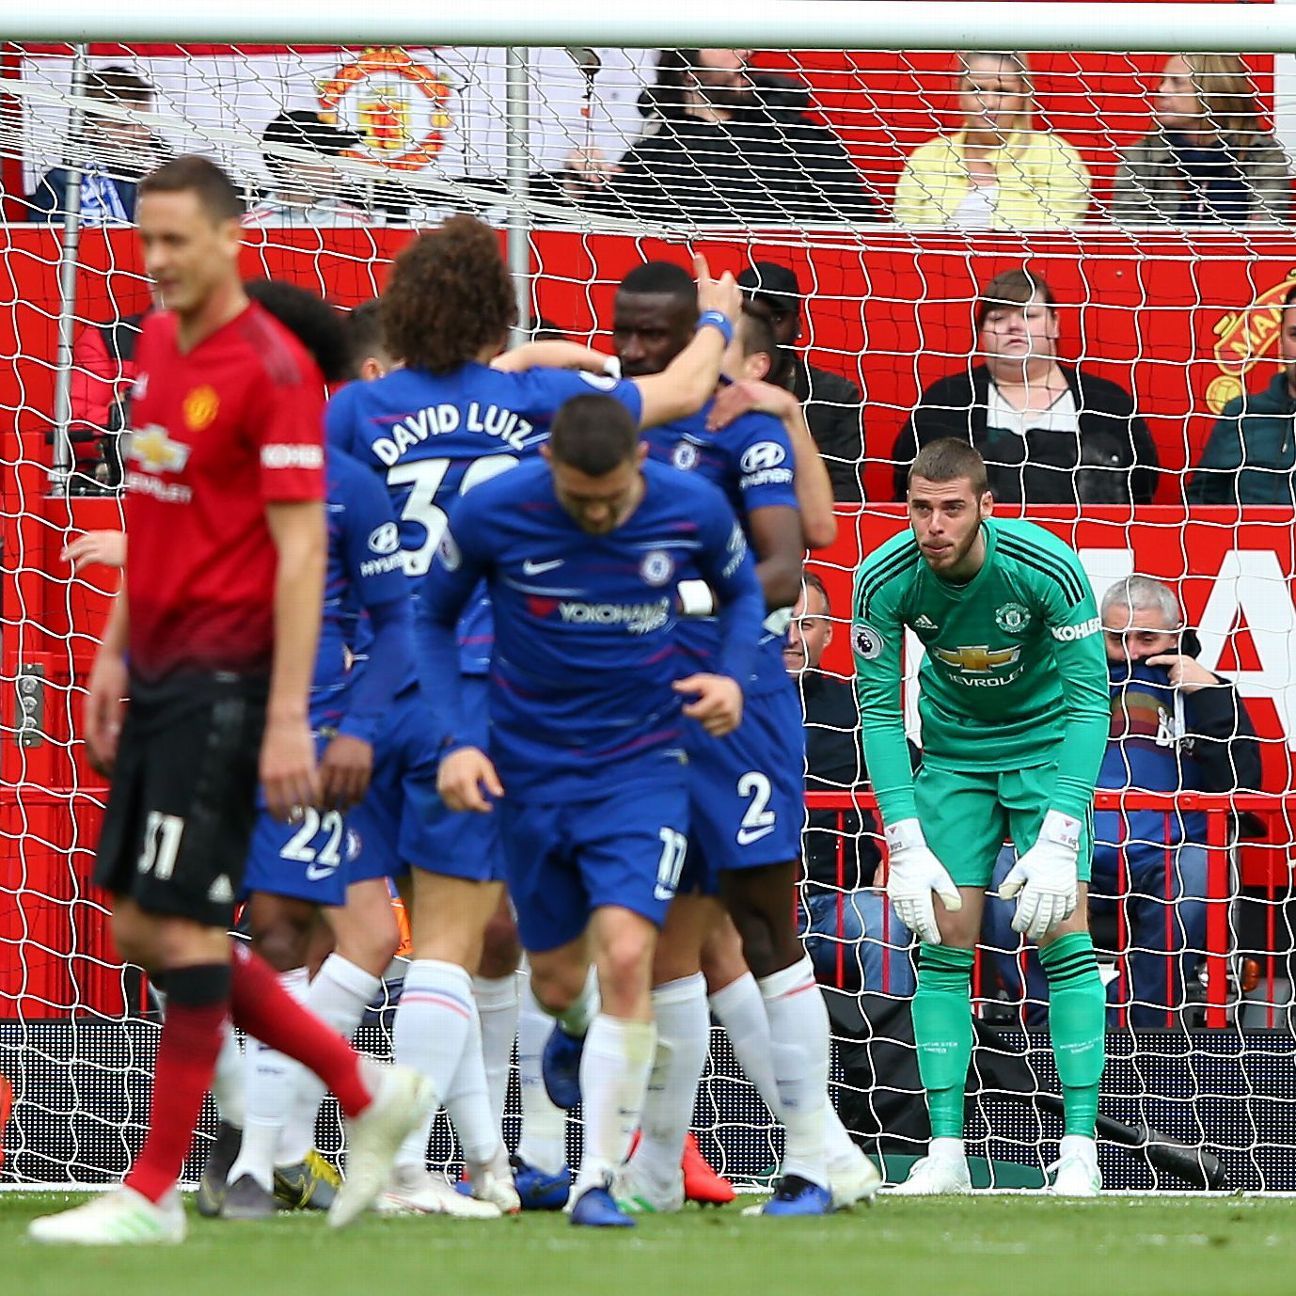 manchester-united-vs-chelsea-football-match-summary-april-28-2019